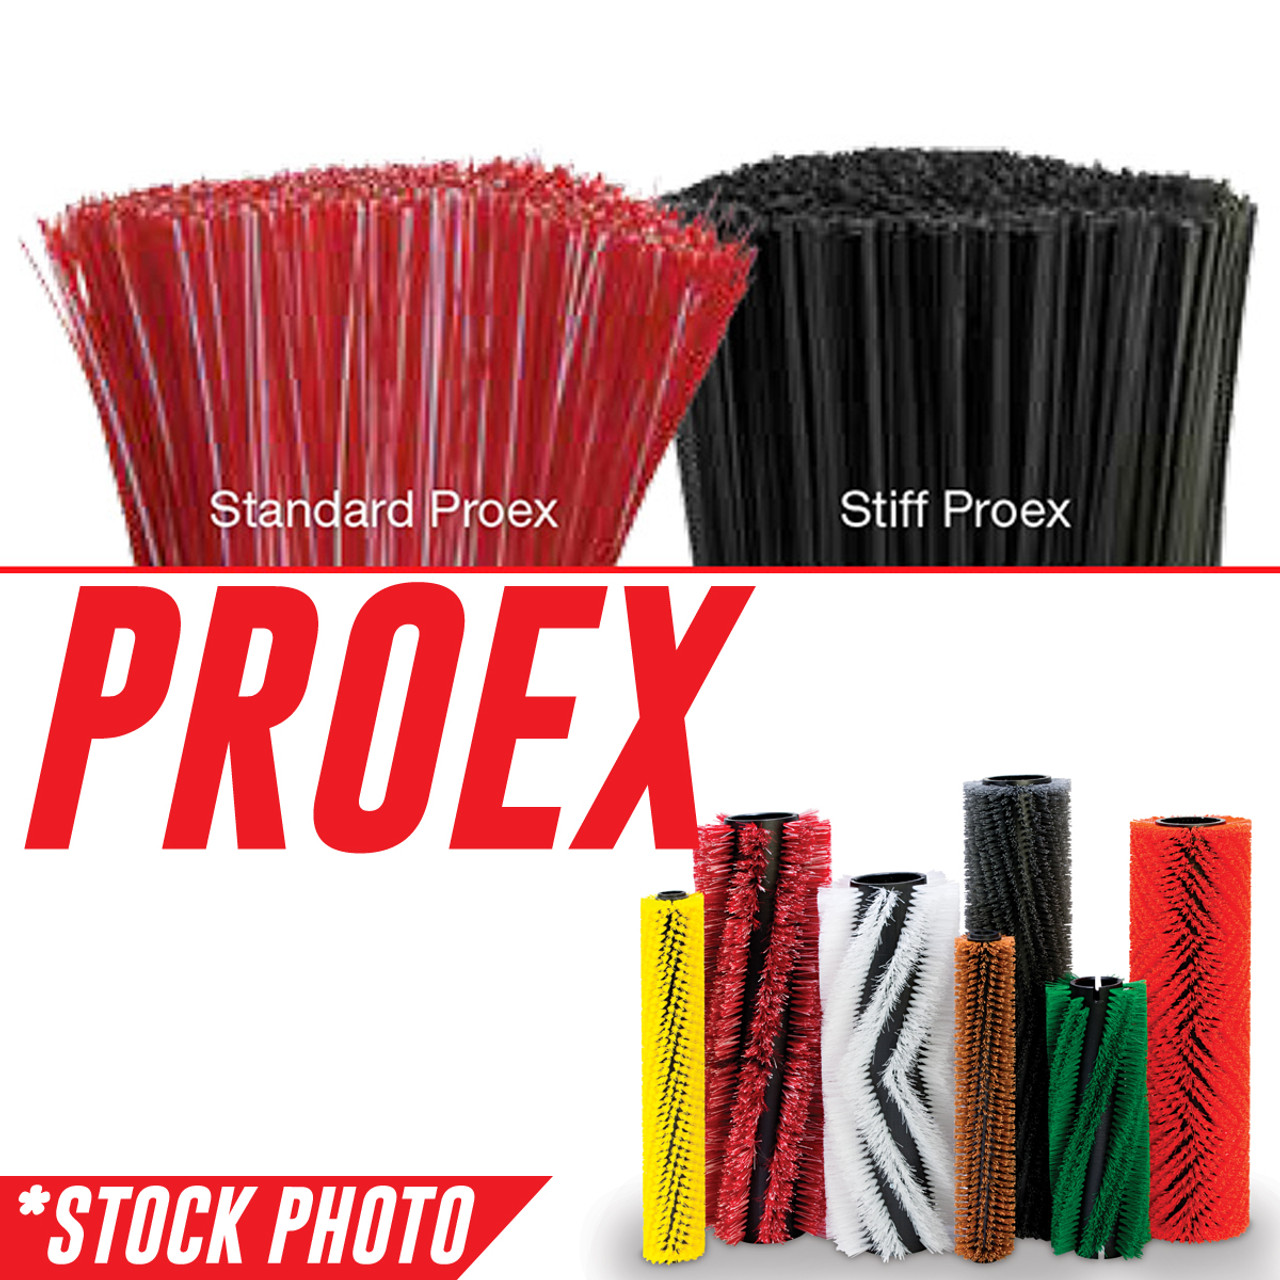 3332456: 48" Cylindrical Brush 8 Double Row Stiff Proex/Wire fits PowerBoss Models Atlas